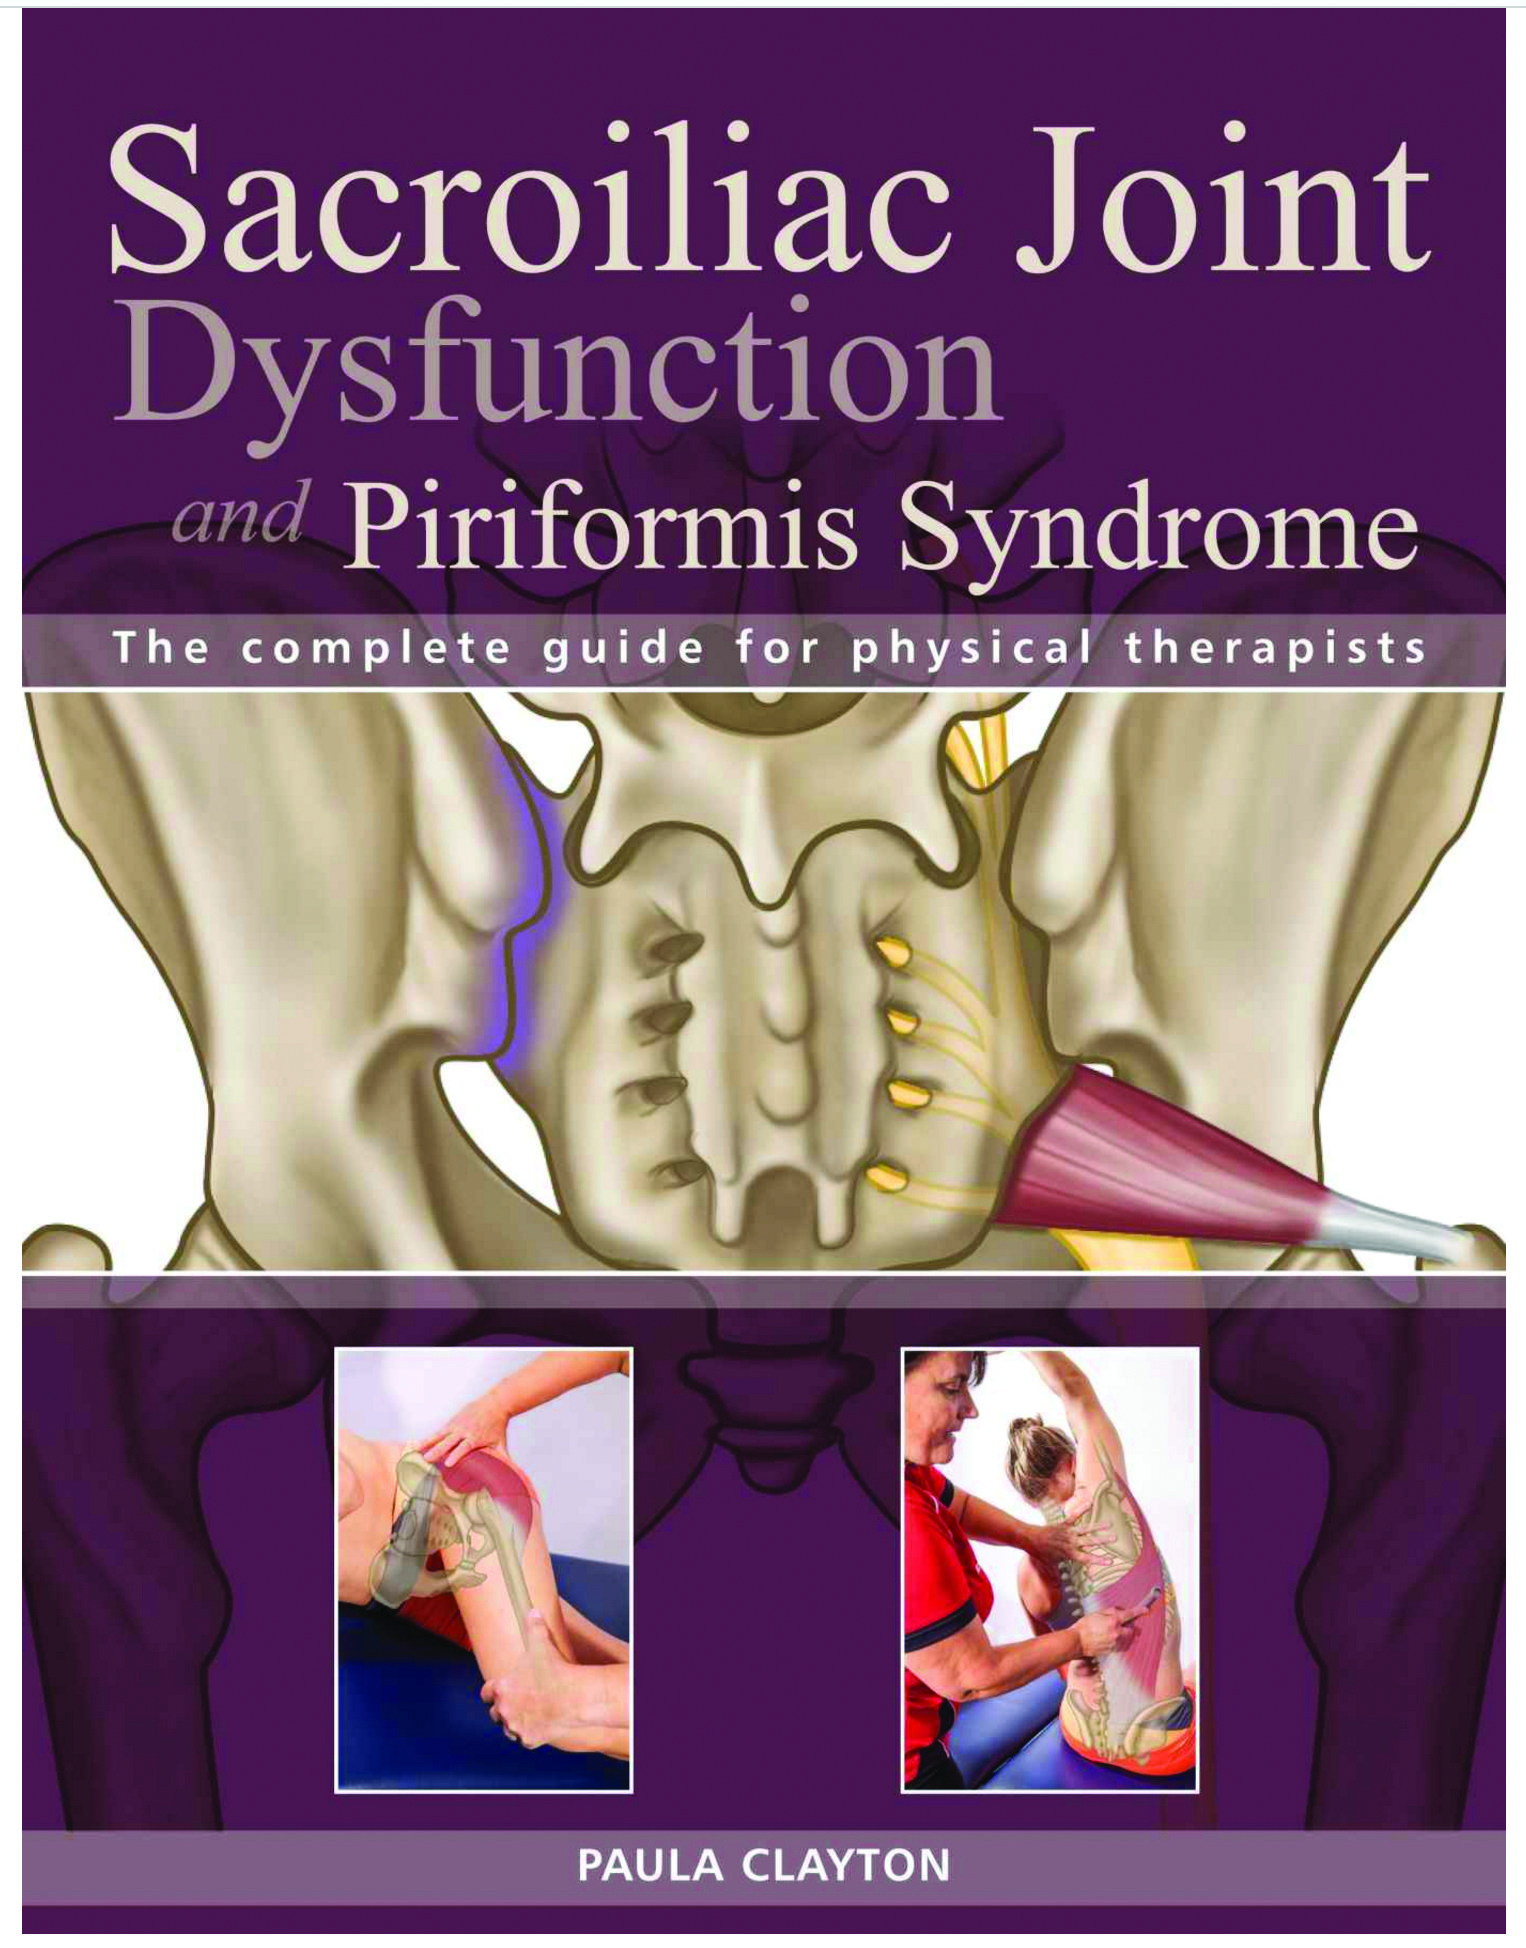 Sacroiliac Joint Dysfunction and Piriformis Syndrome [Book ...